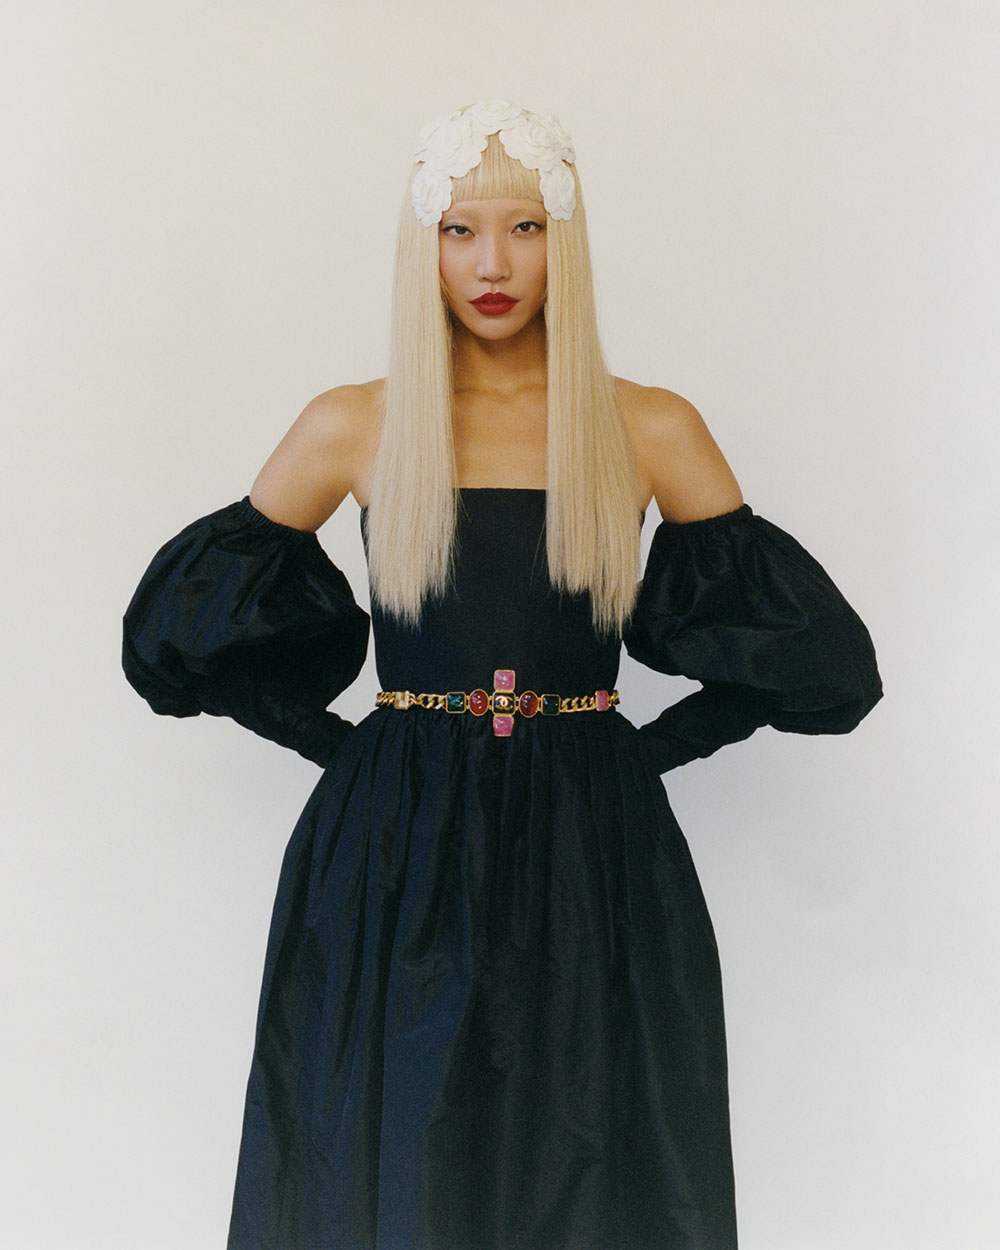 Soo Joo Park covers The WOW Magazine Issue 3 2020 by Peter Ash Lee